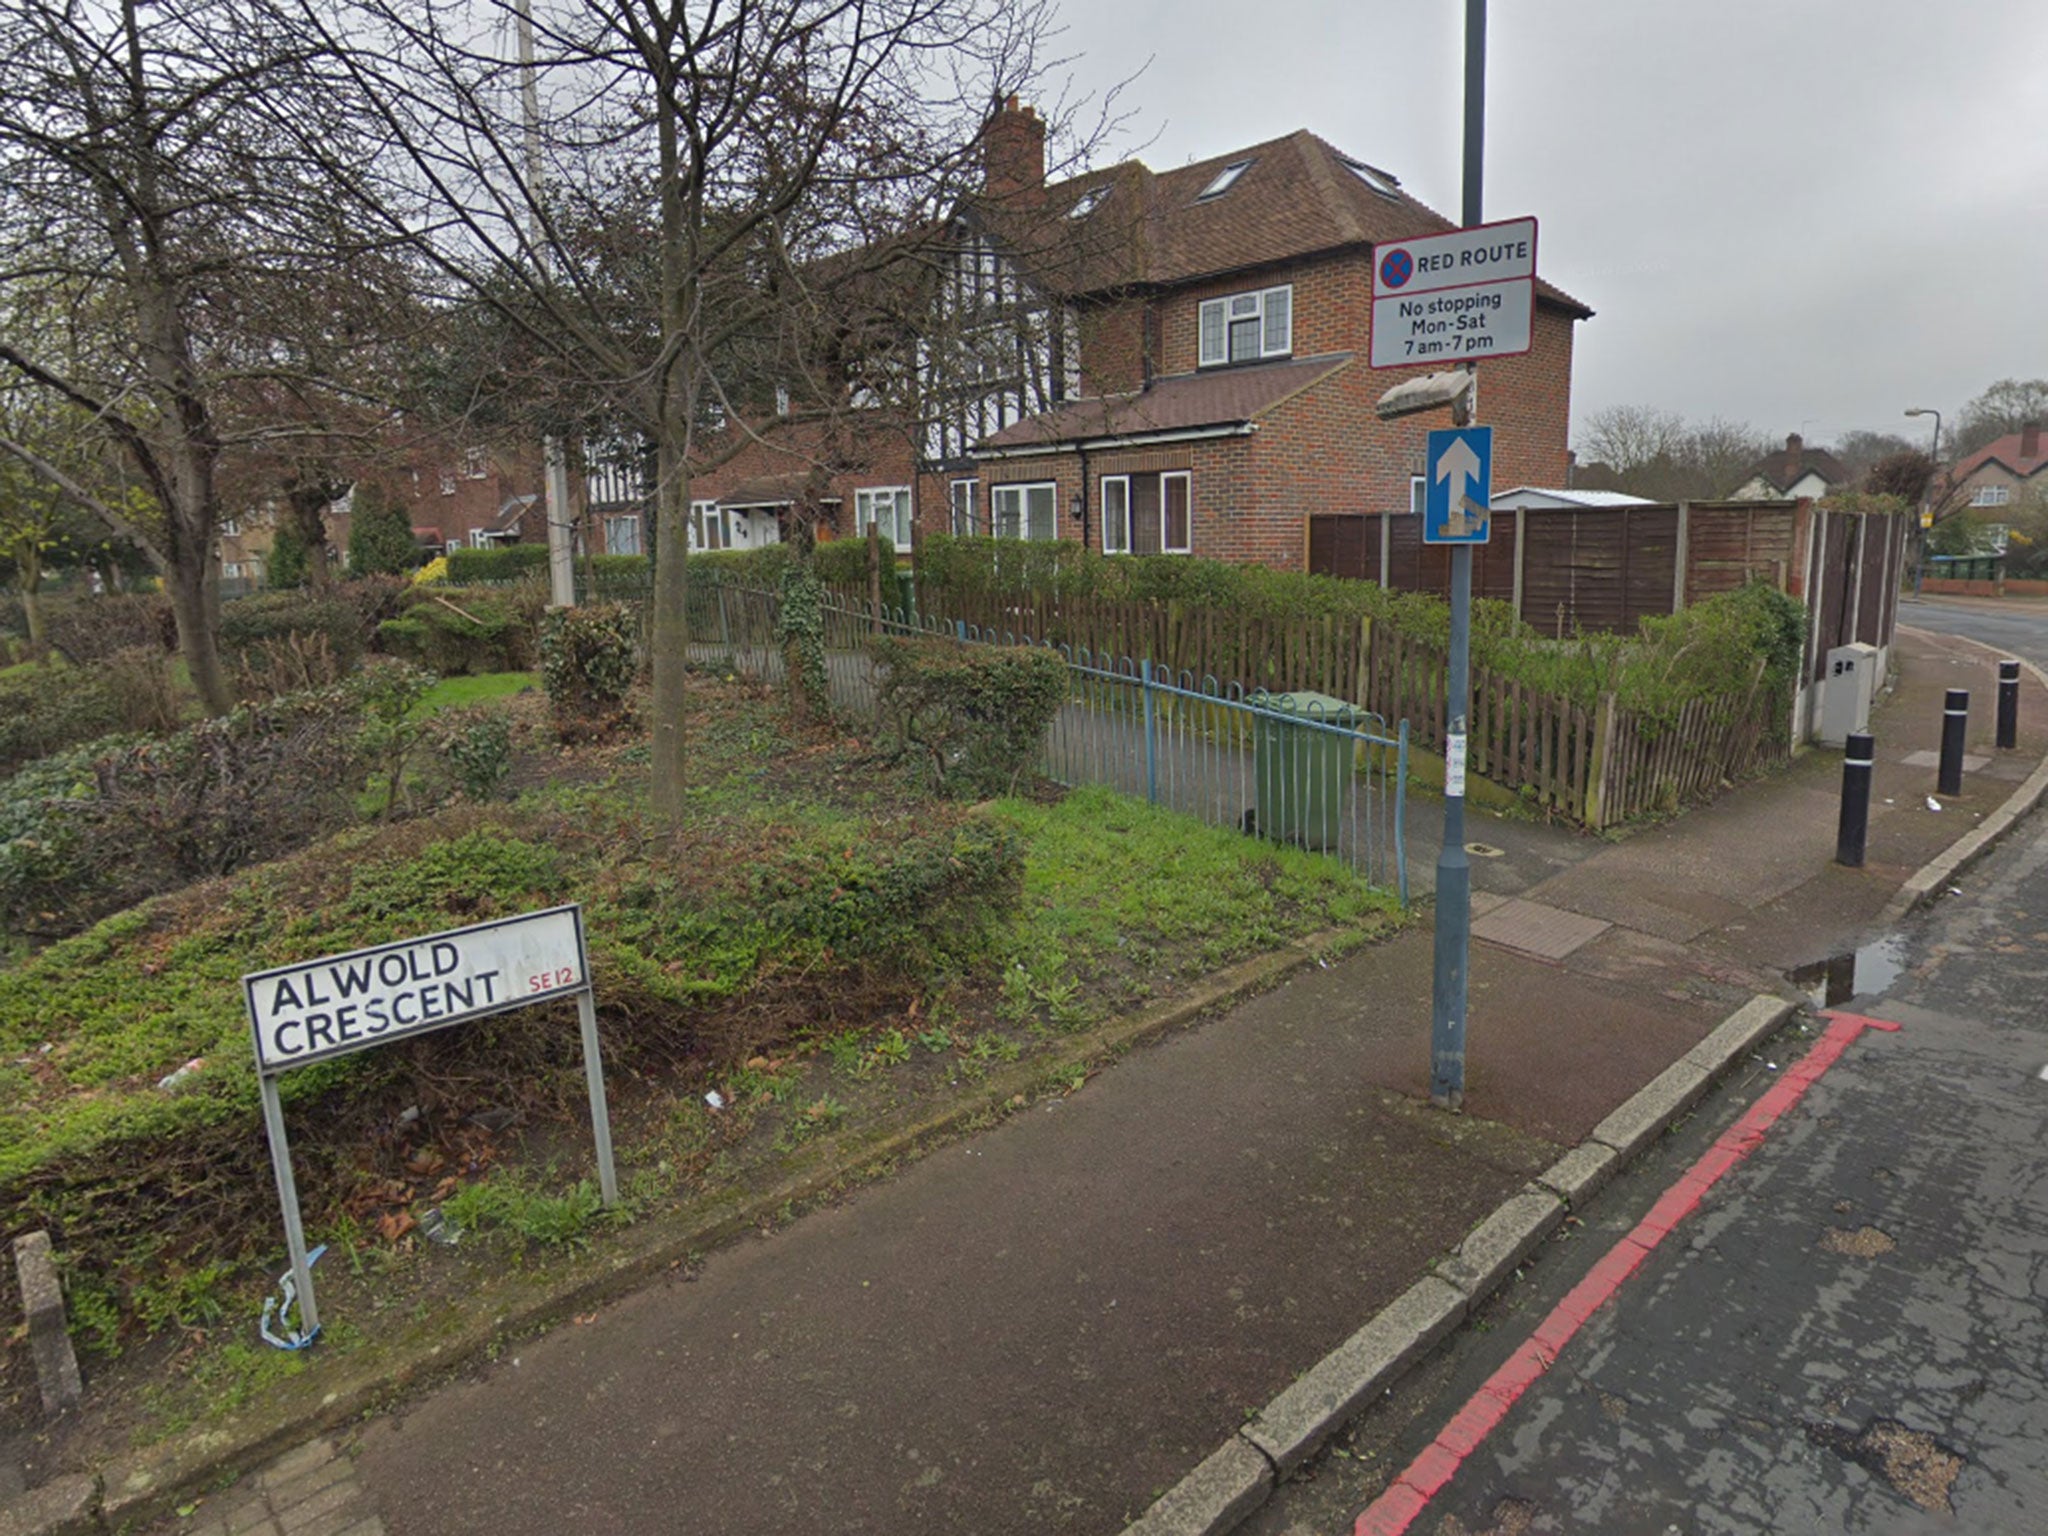 Police were called to a fight in Alwold Crescent, Lee, on 11 December before teenagers arrived at a London hospital with stab wounds